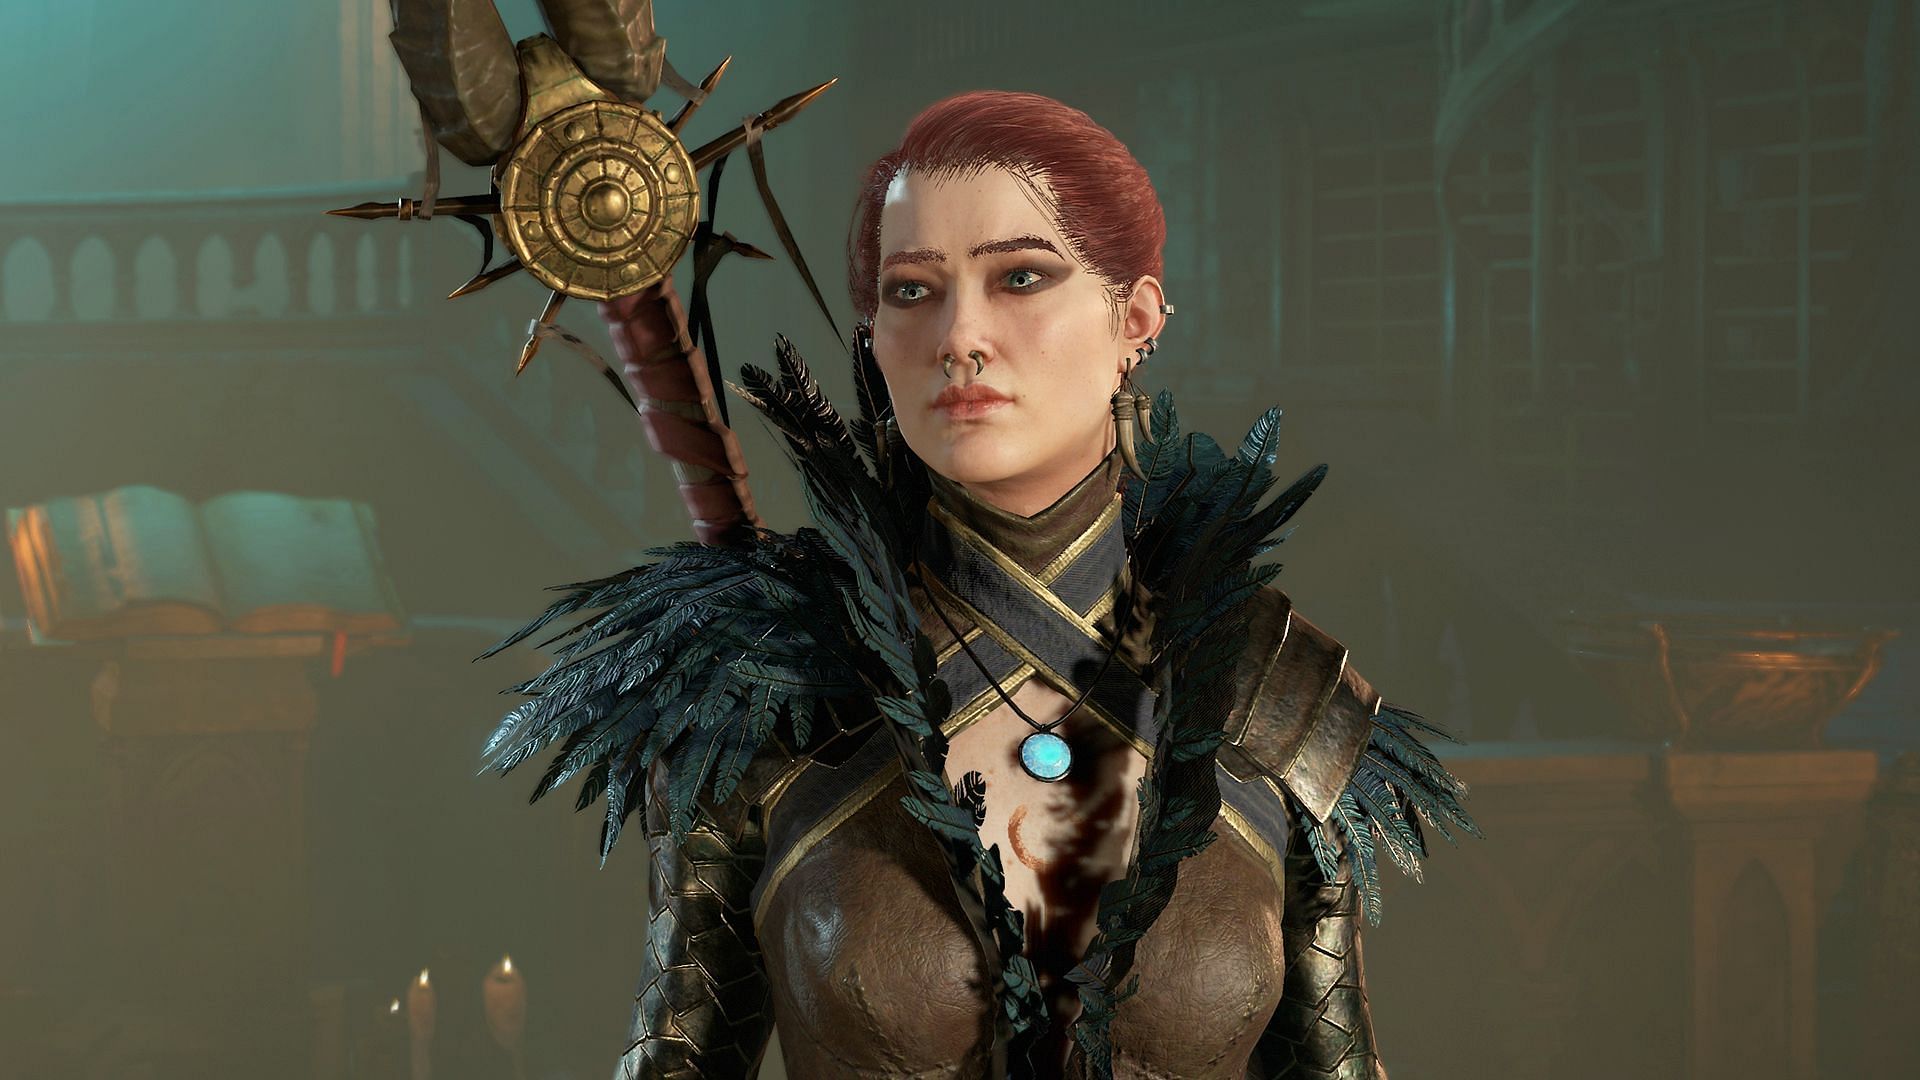 The image depicts a female sorcerer character in Diablo 4